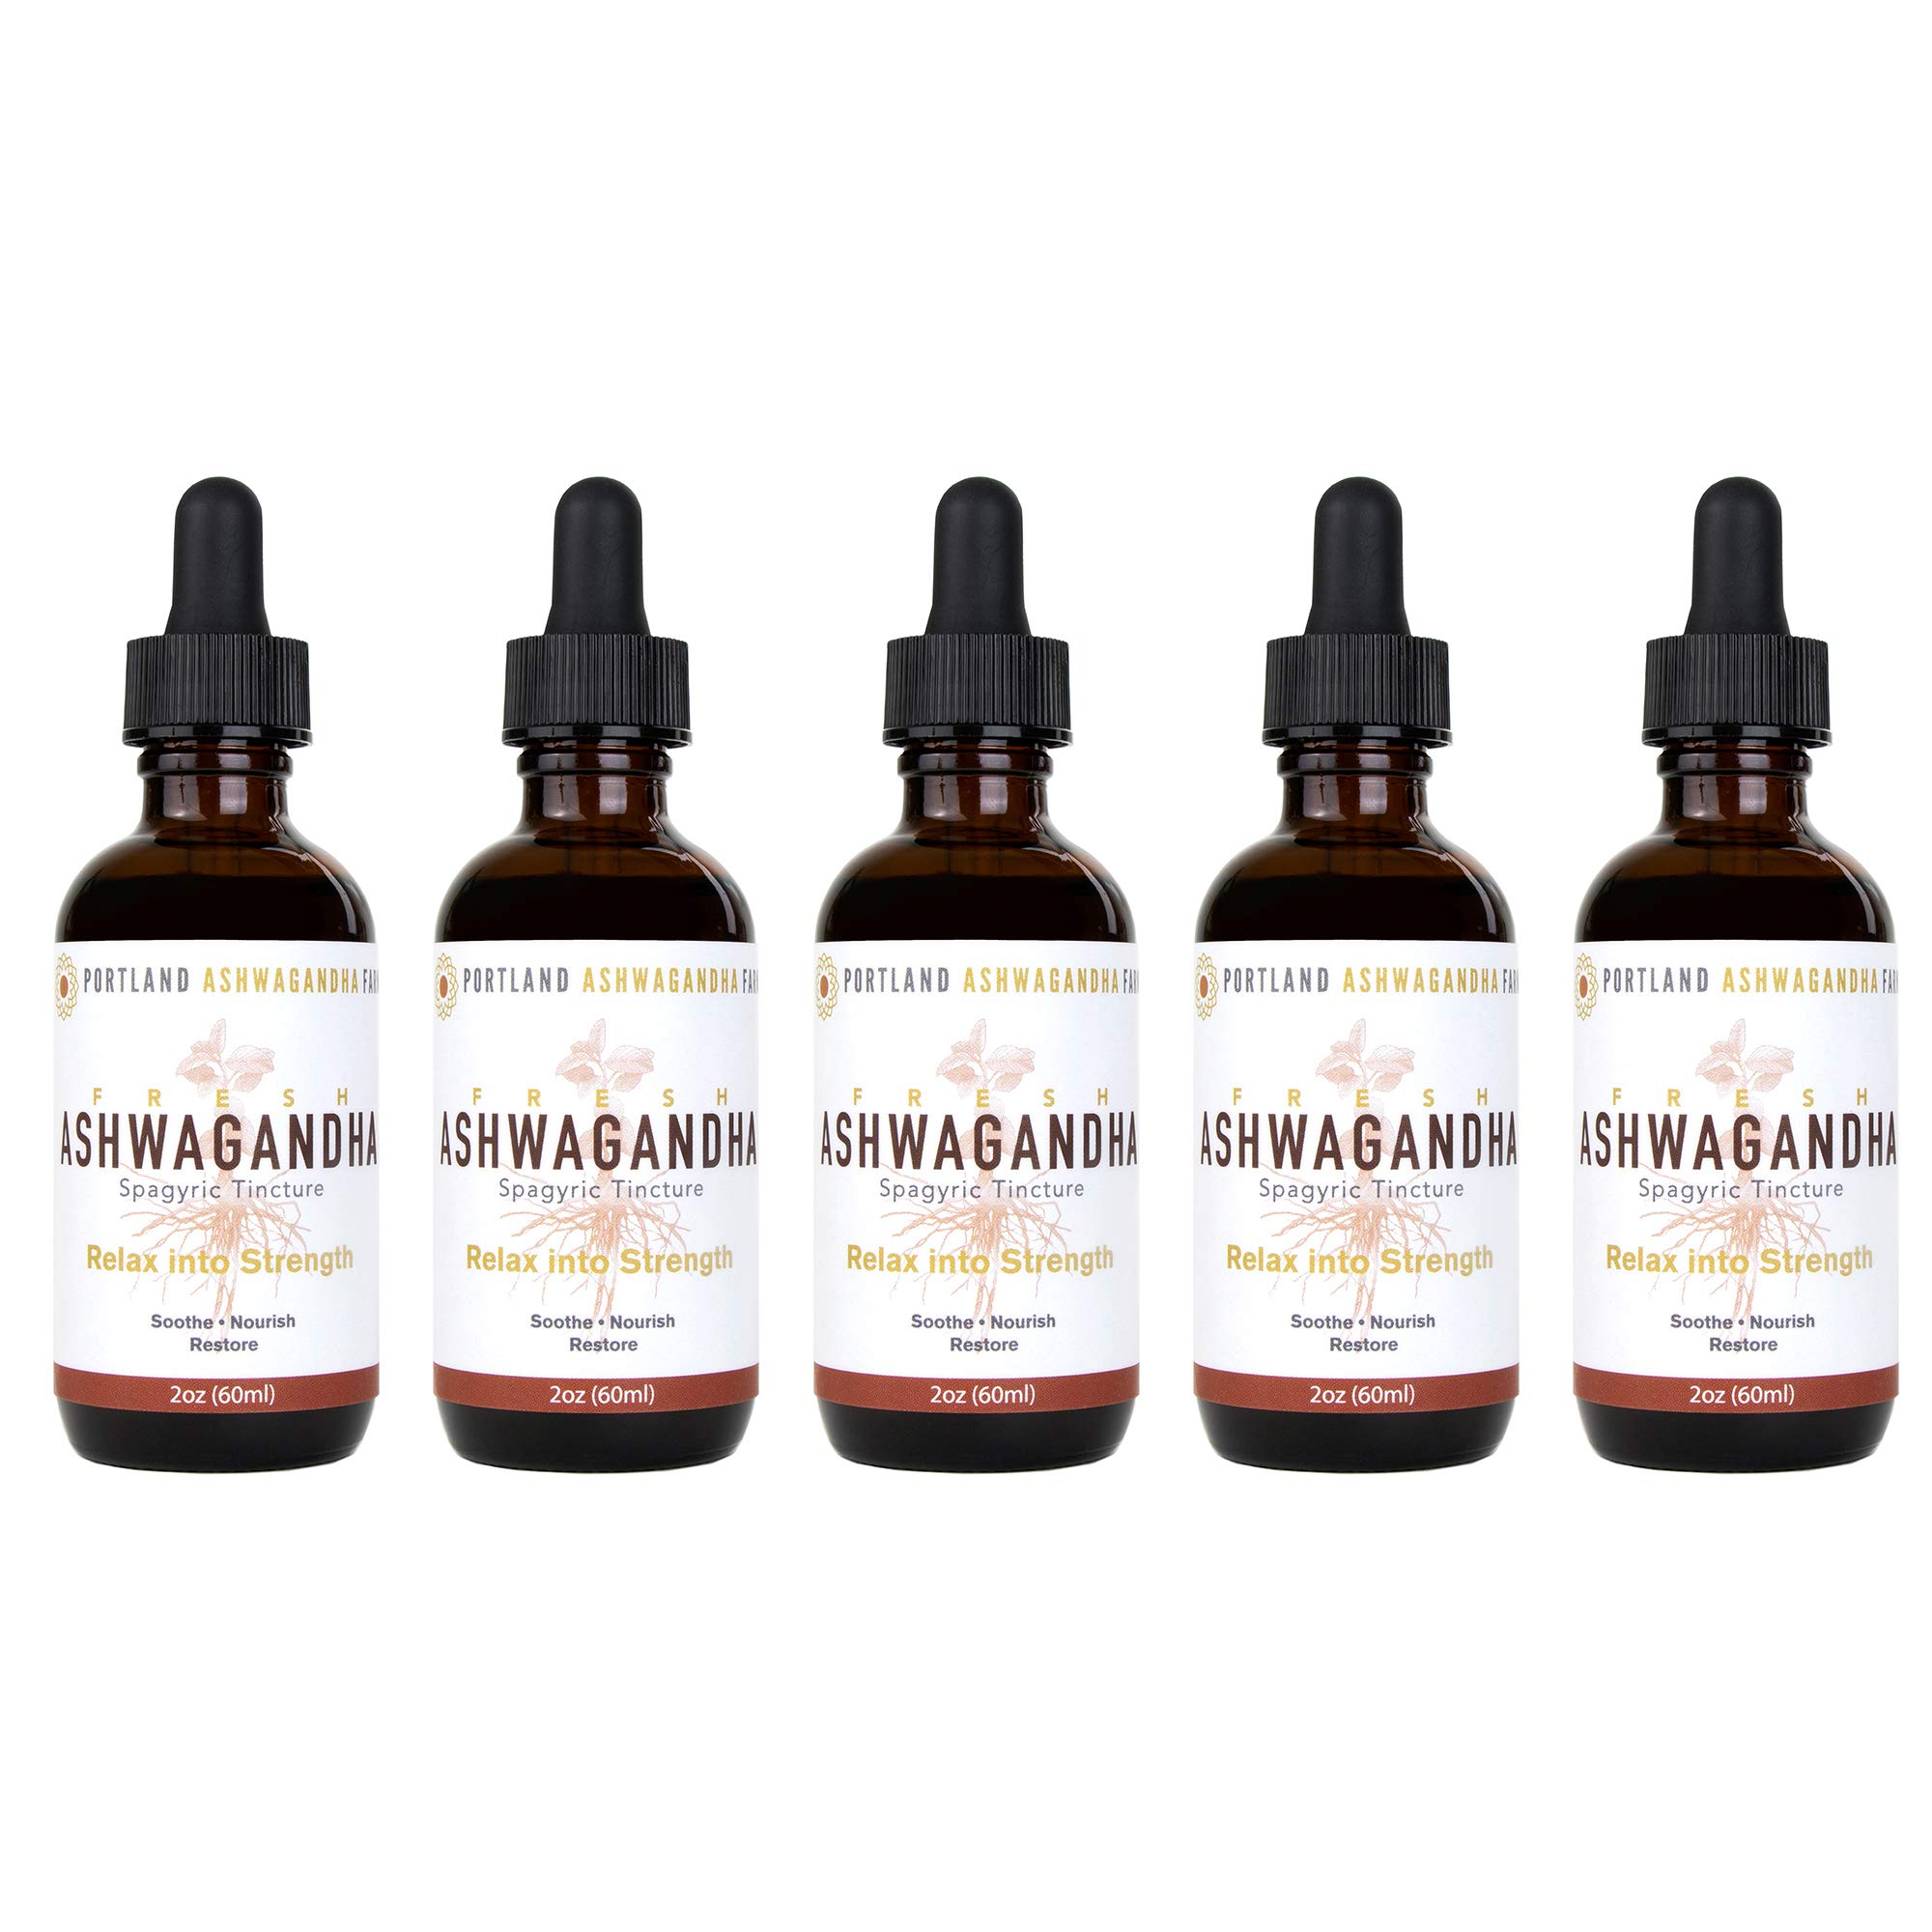 Fresh (not Dried) Ashwagandha Adaptogenic Ayurvedic Liquid Tincture for Enhanced Absorption to Help Manage Stress, Increase Energy, Anti-Anxiety & ...